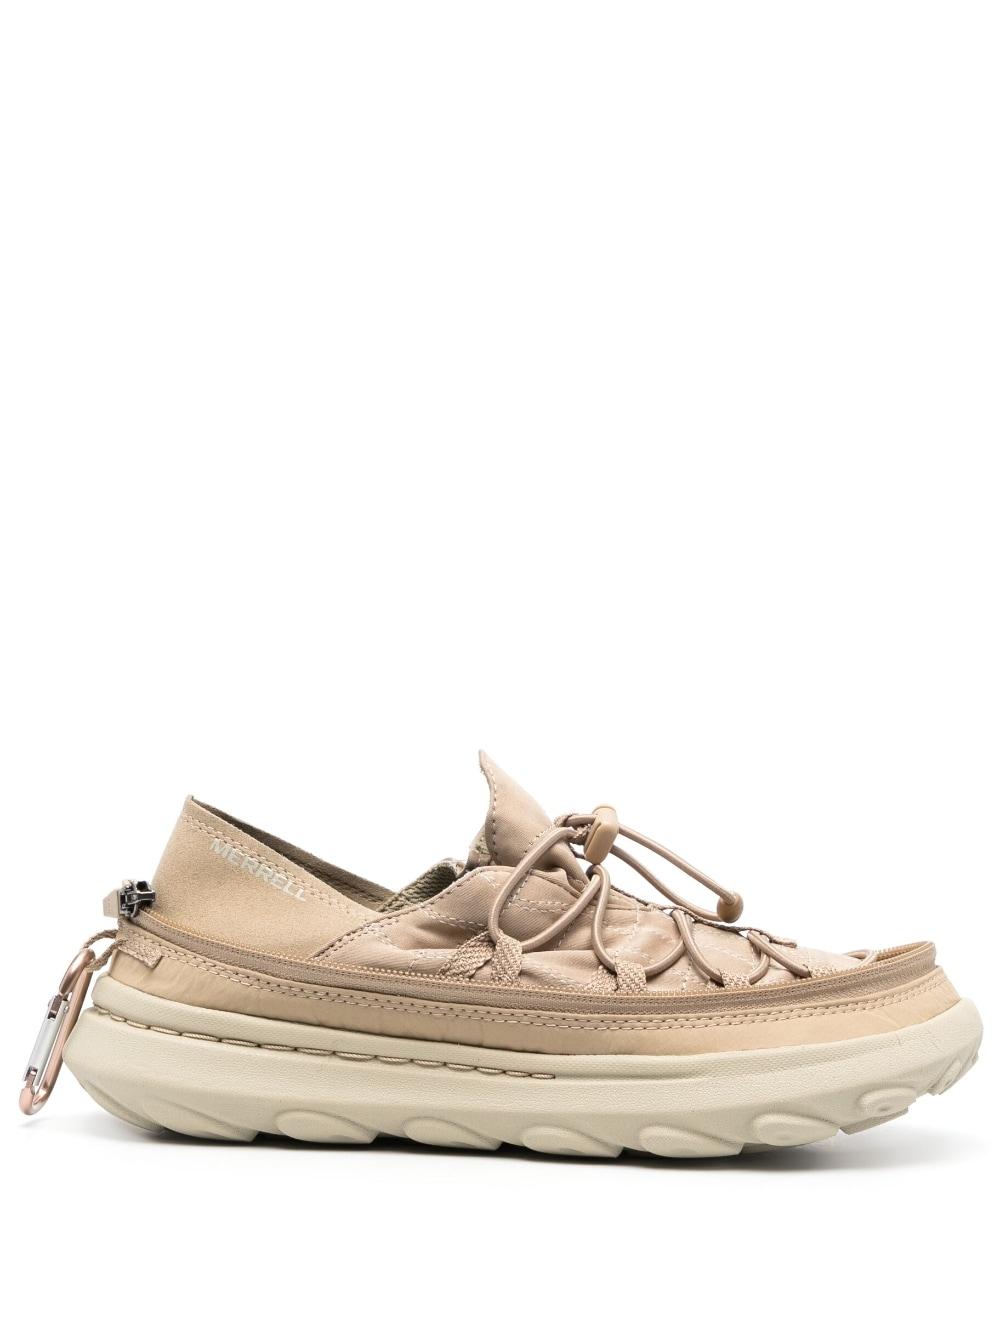 Merrell Hut Moc 2 Packable Sneakers in Natural for Men | Lyst